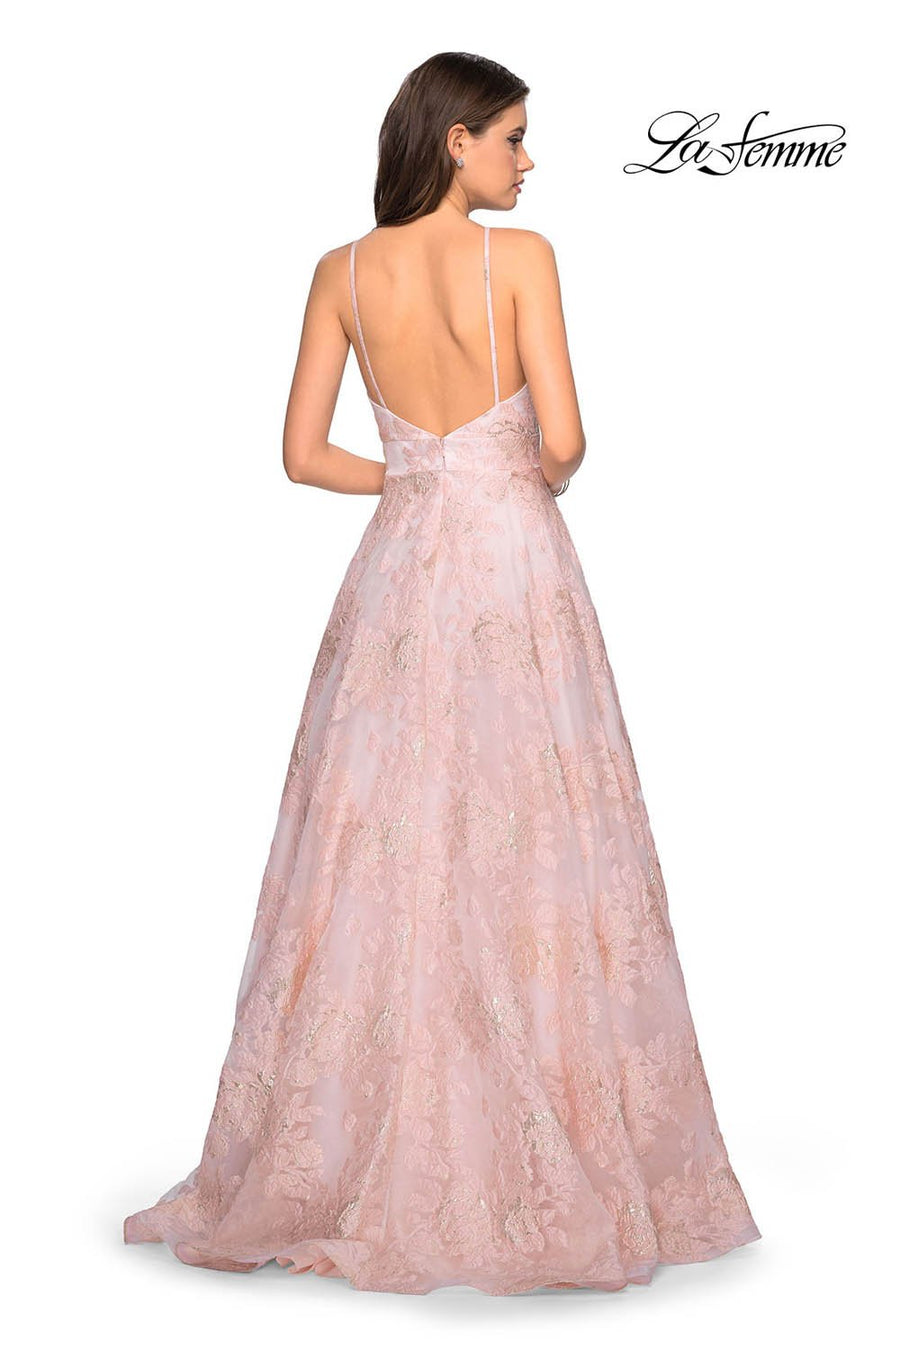 Gigi by La Femme 27549 prom dress images.  Gigi by La Femme 27549 is available in these colors: Pink Mulighti, Silver.